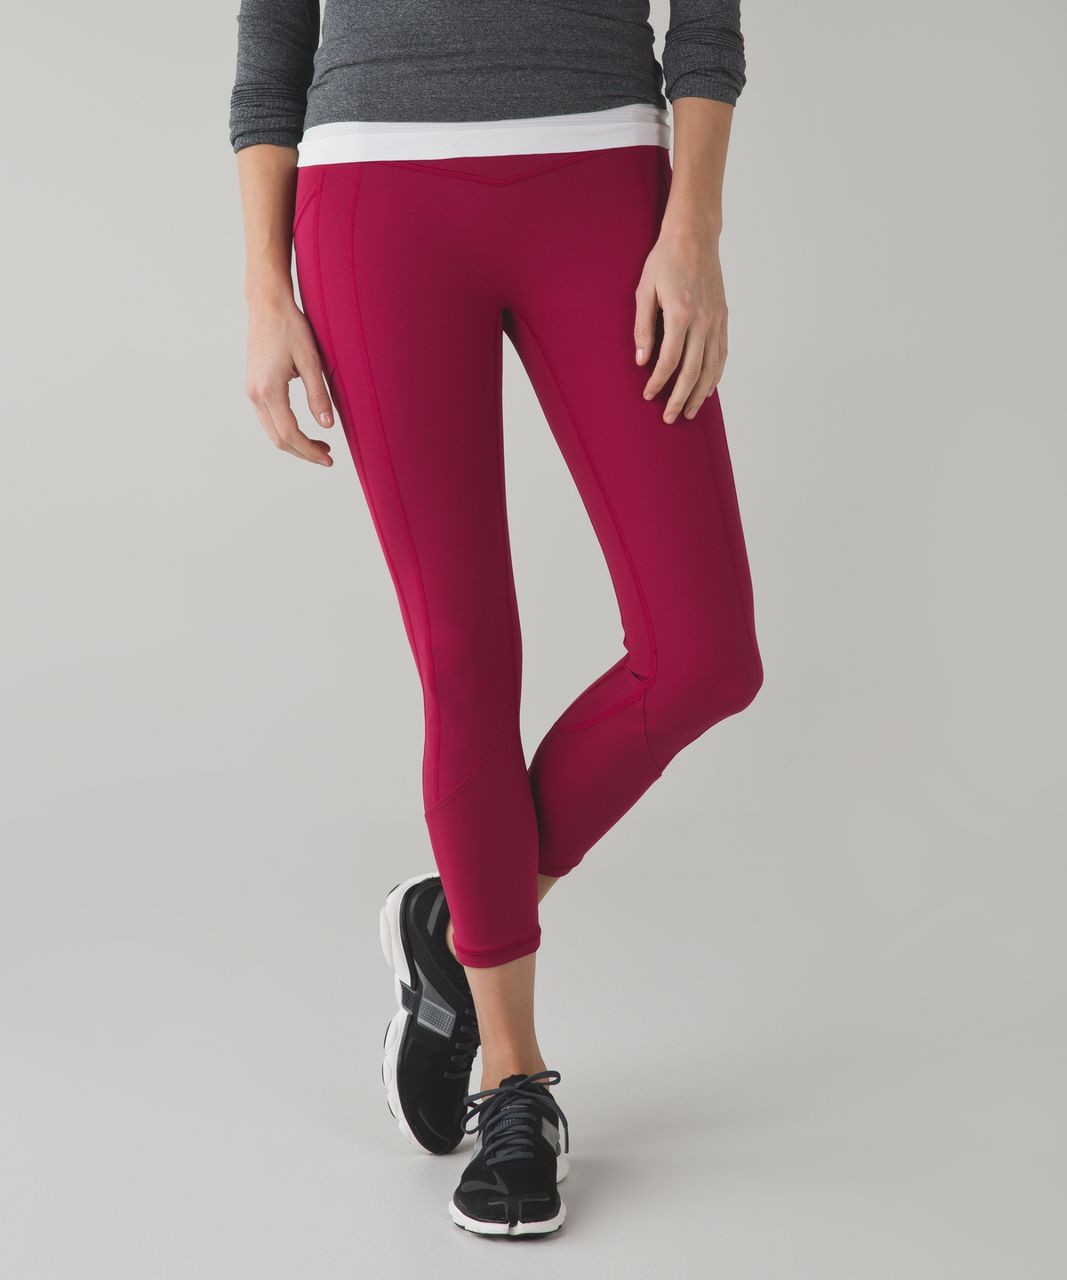 Lululemon All the Right Places High-Rise Crop 23 - True Navy